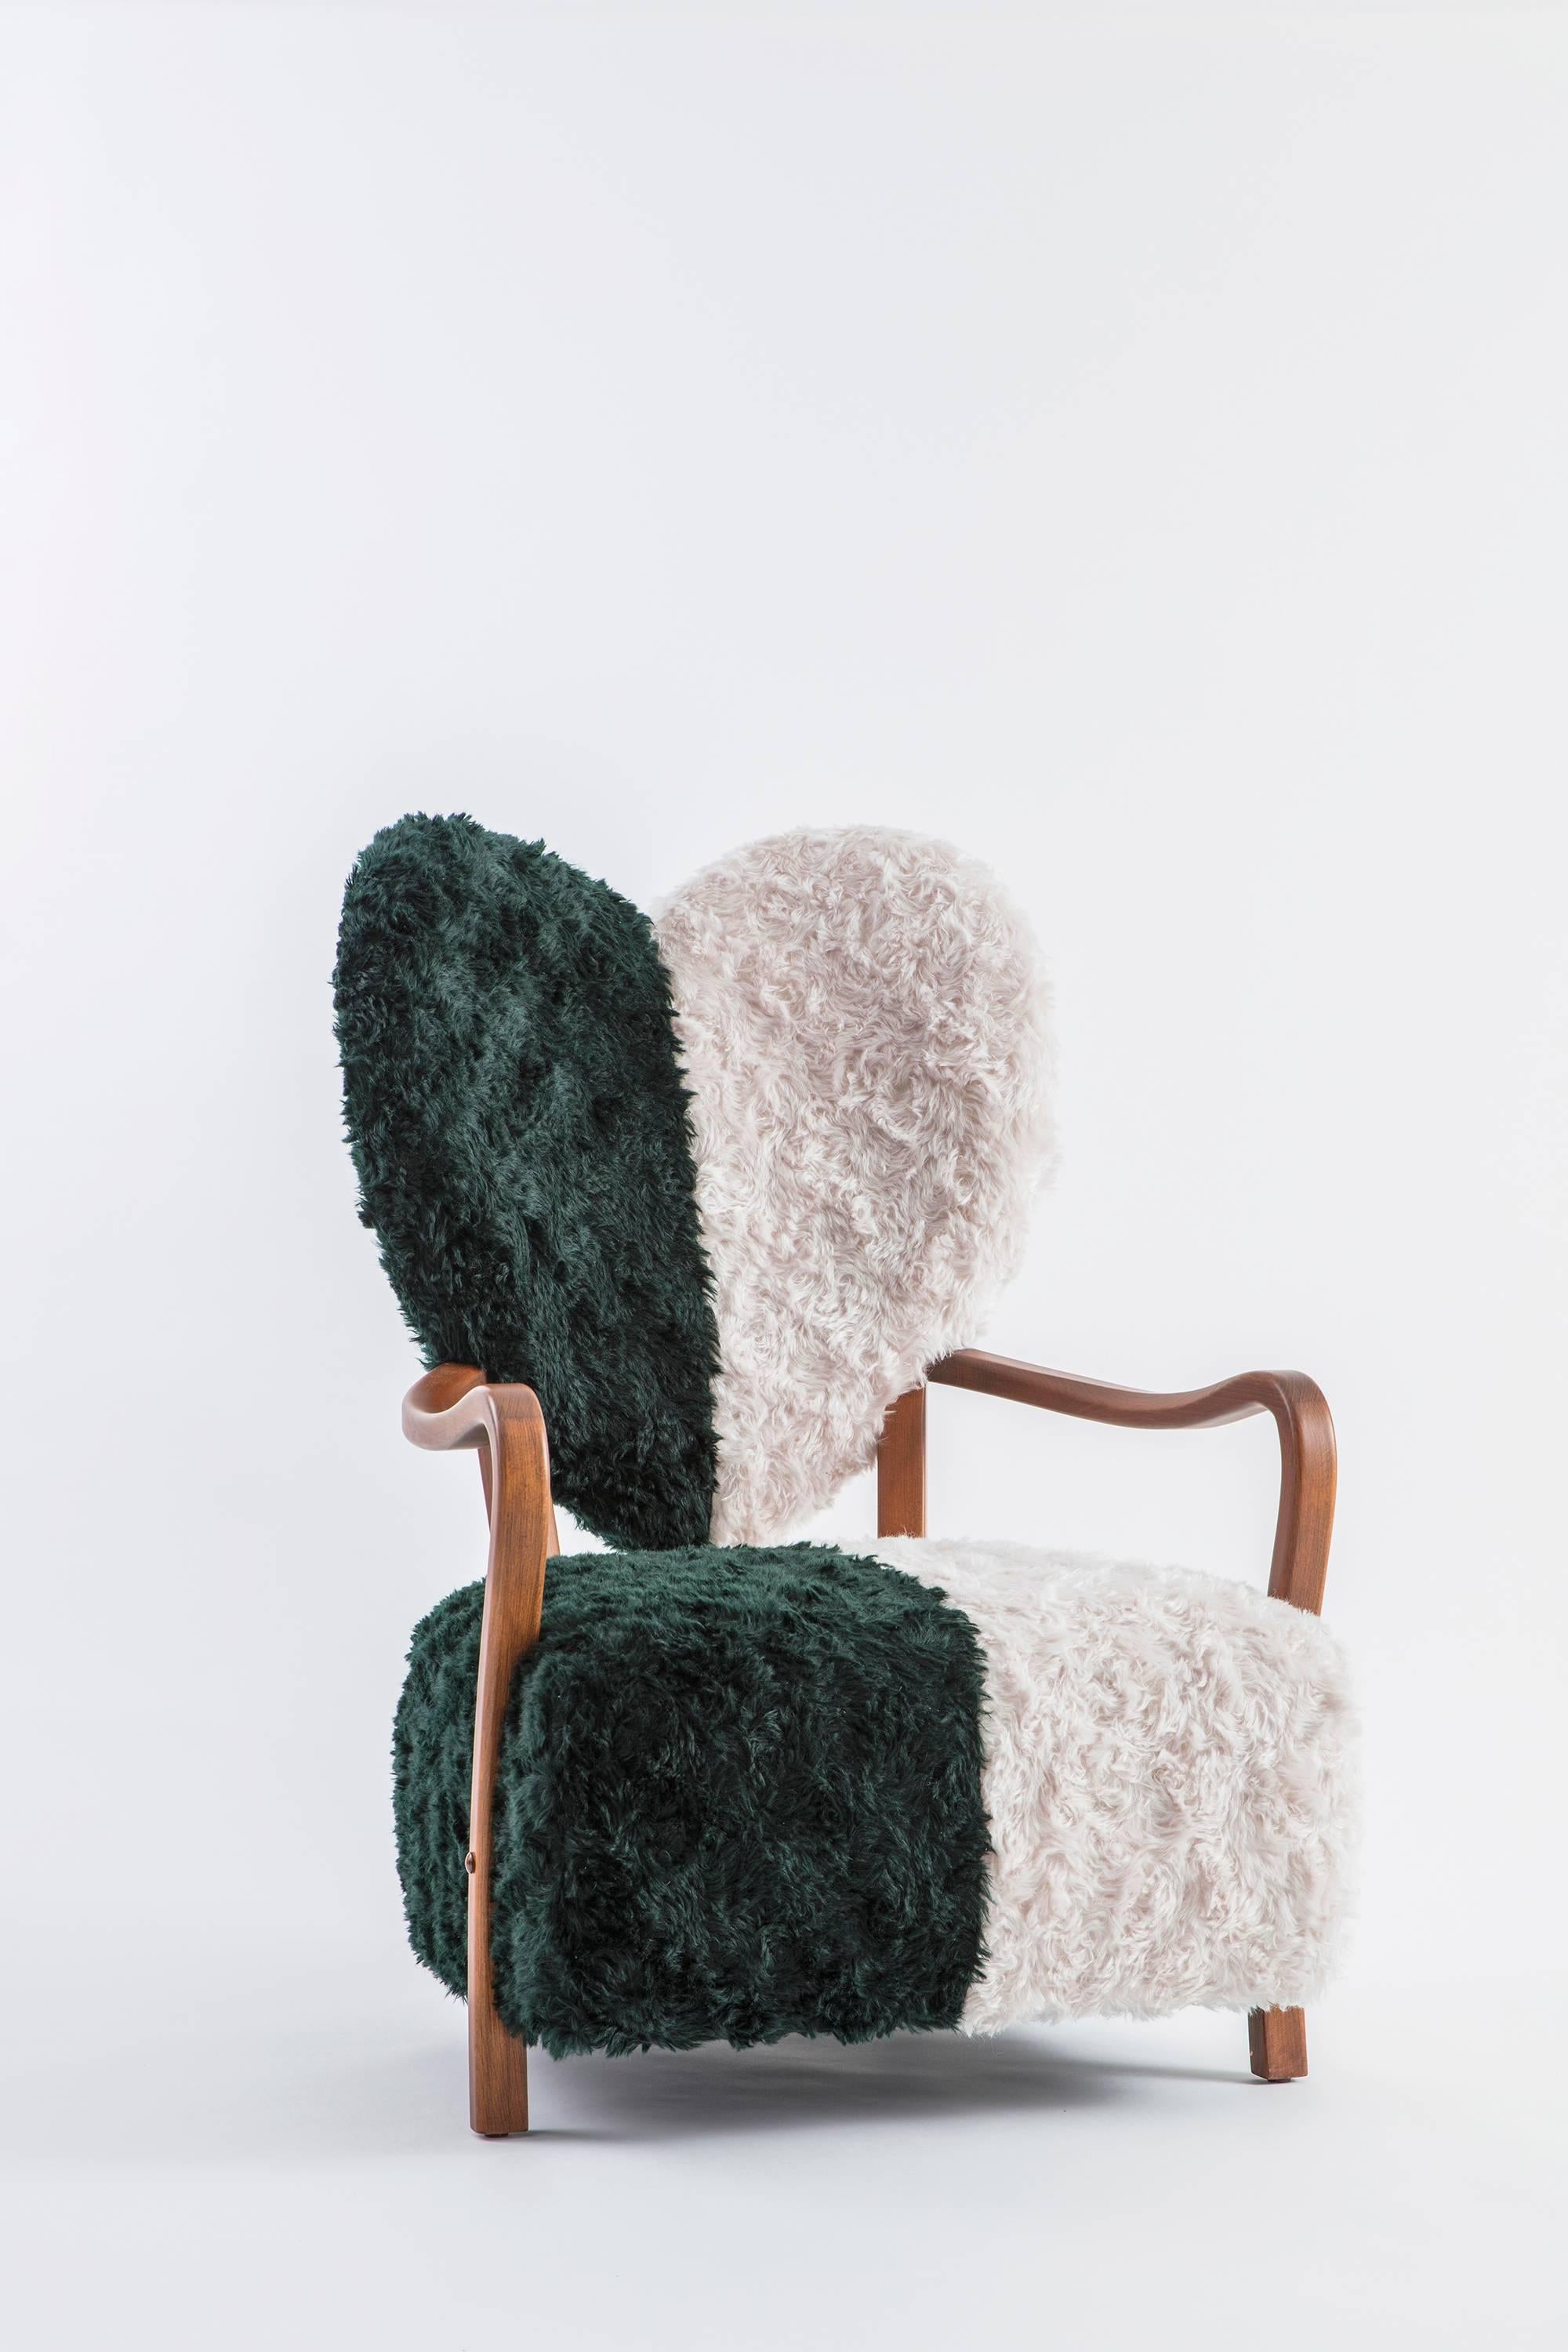 Contemporary Beechwood Uni Armchair with Heart Shaped Back and Mohair Upholstery For Sale 1